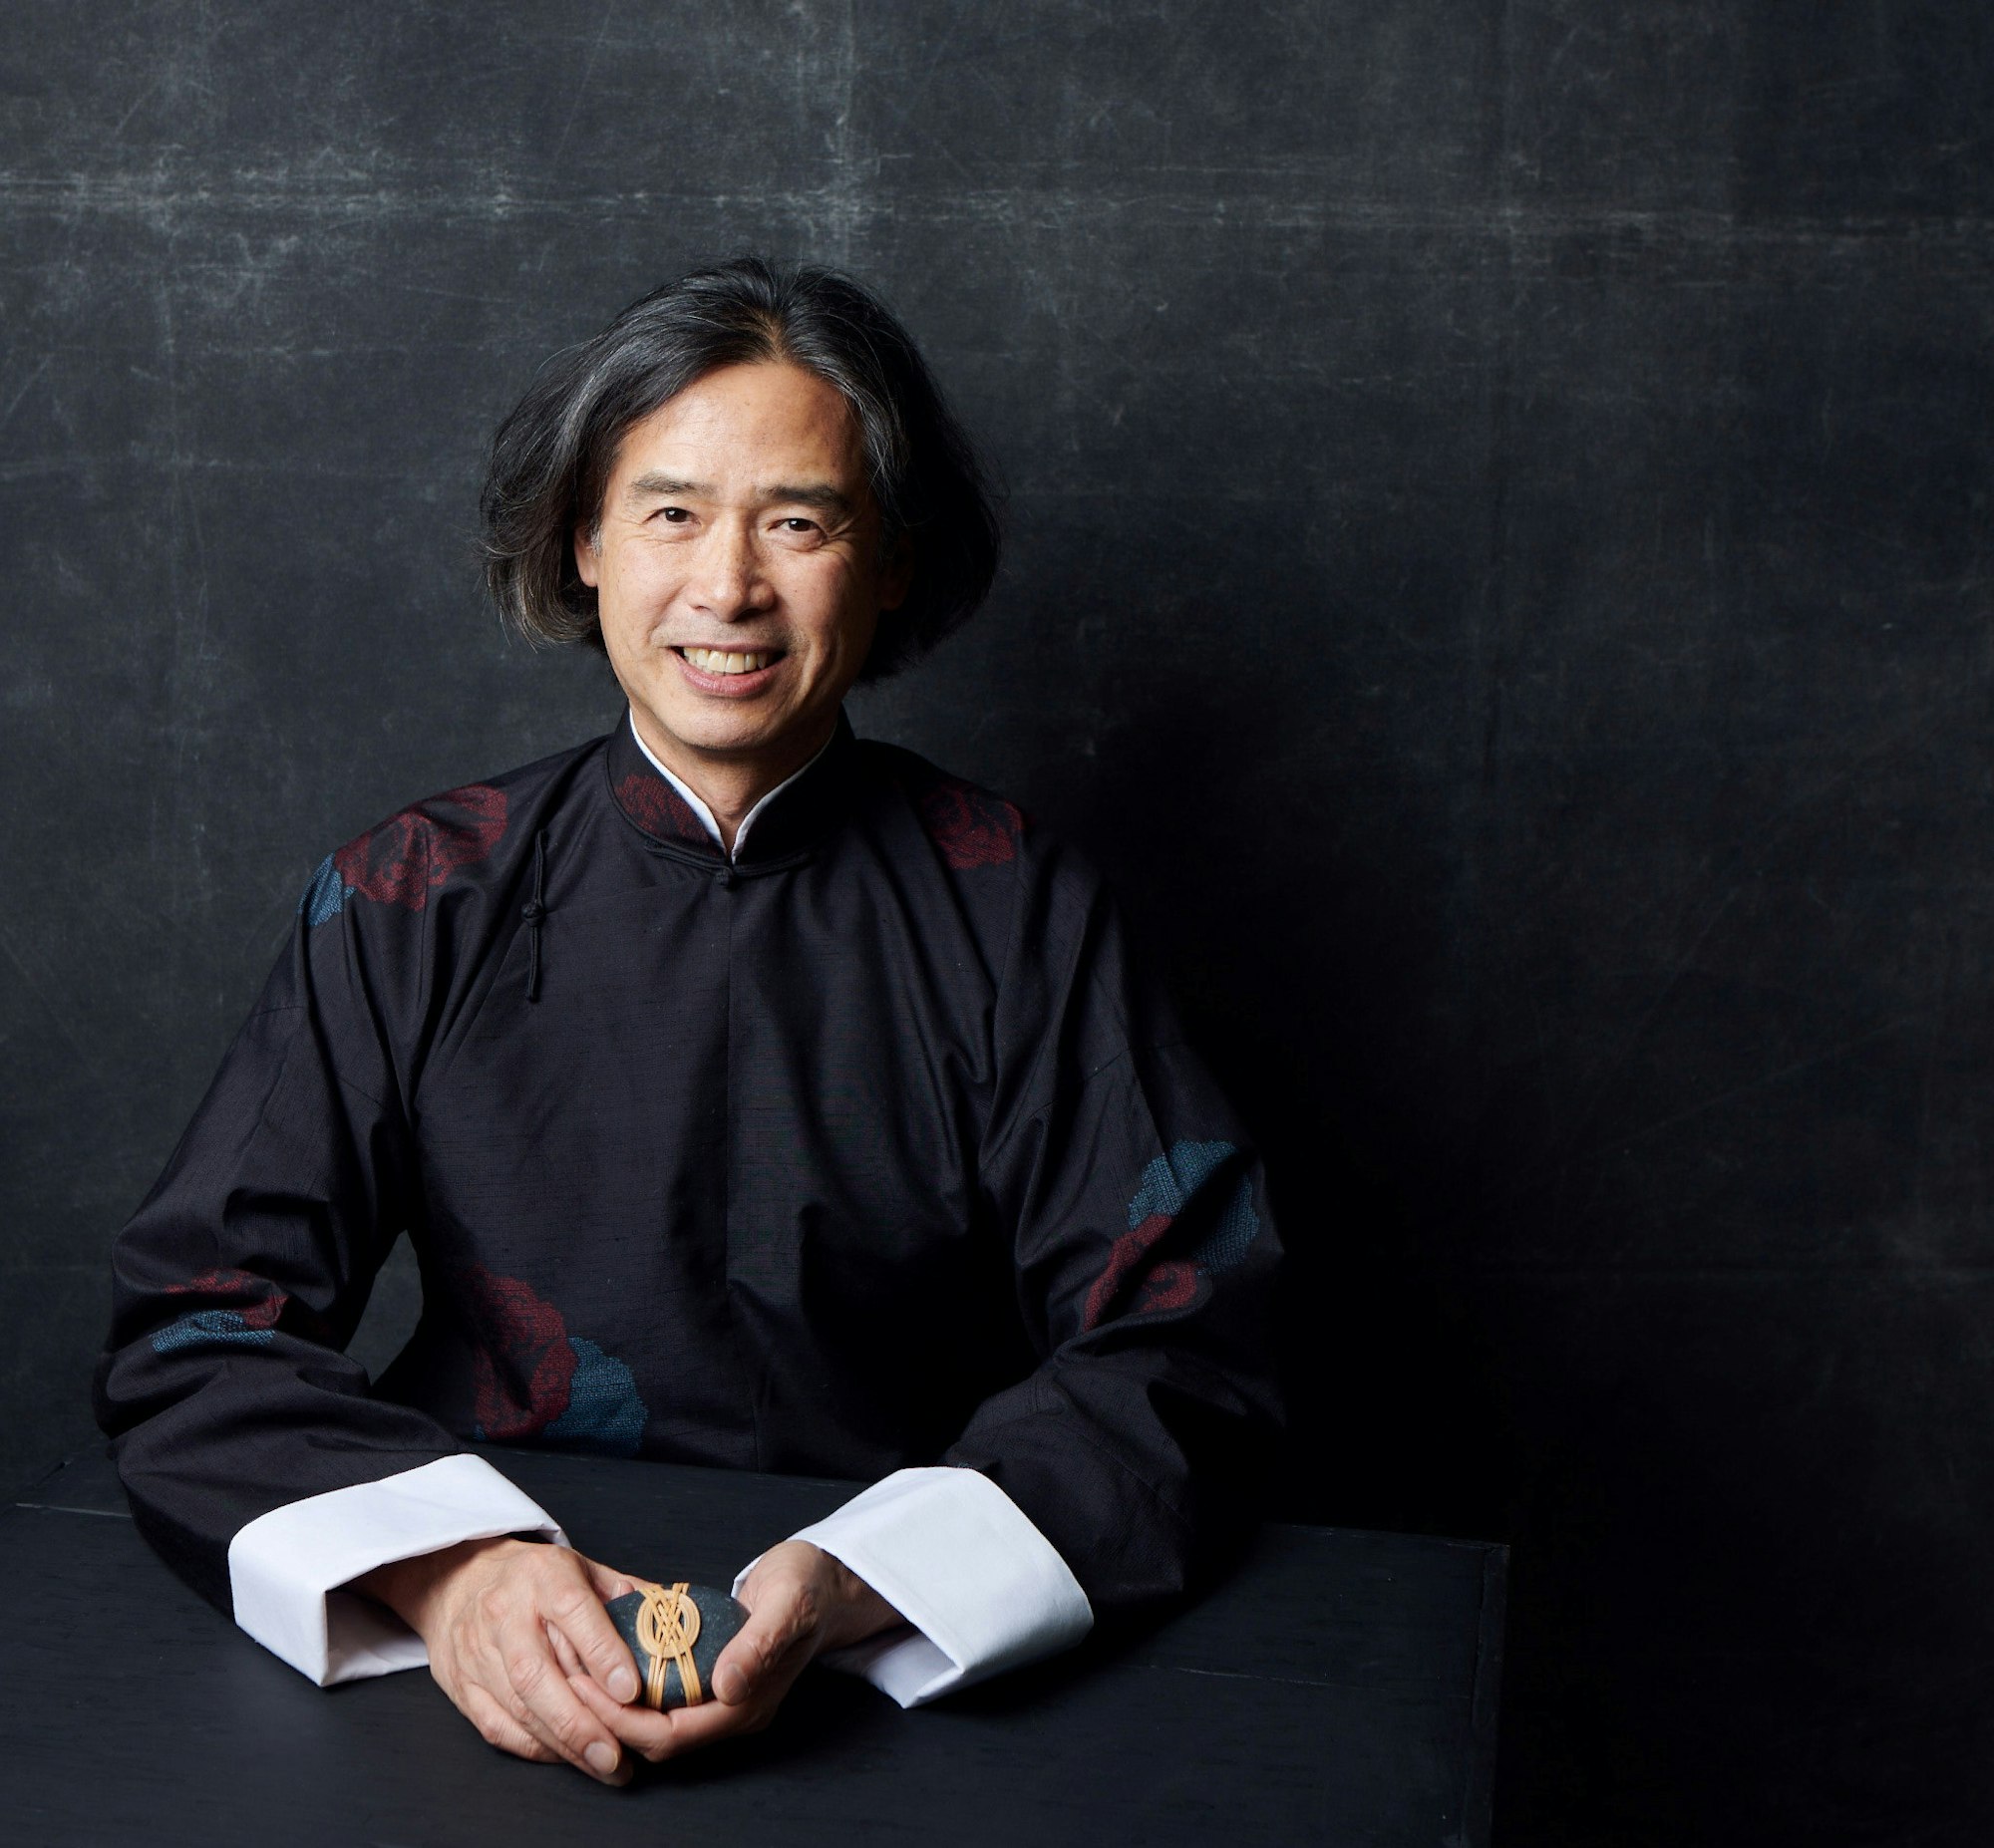 A person with dark, chin-length bobbed hair, dressed in a black high-collared robe with wide white cuffs, sits holding a small wrapped object